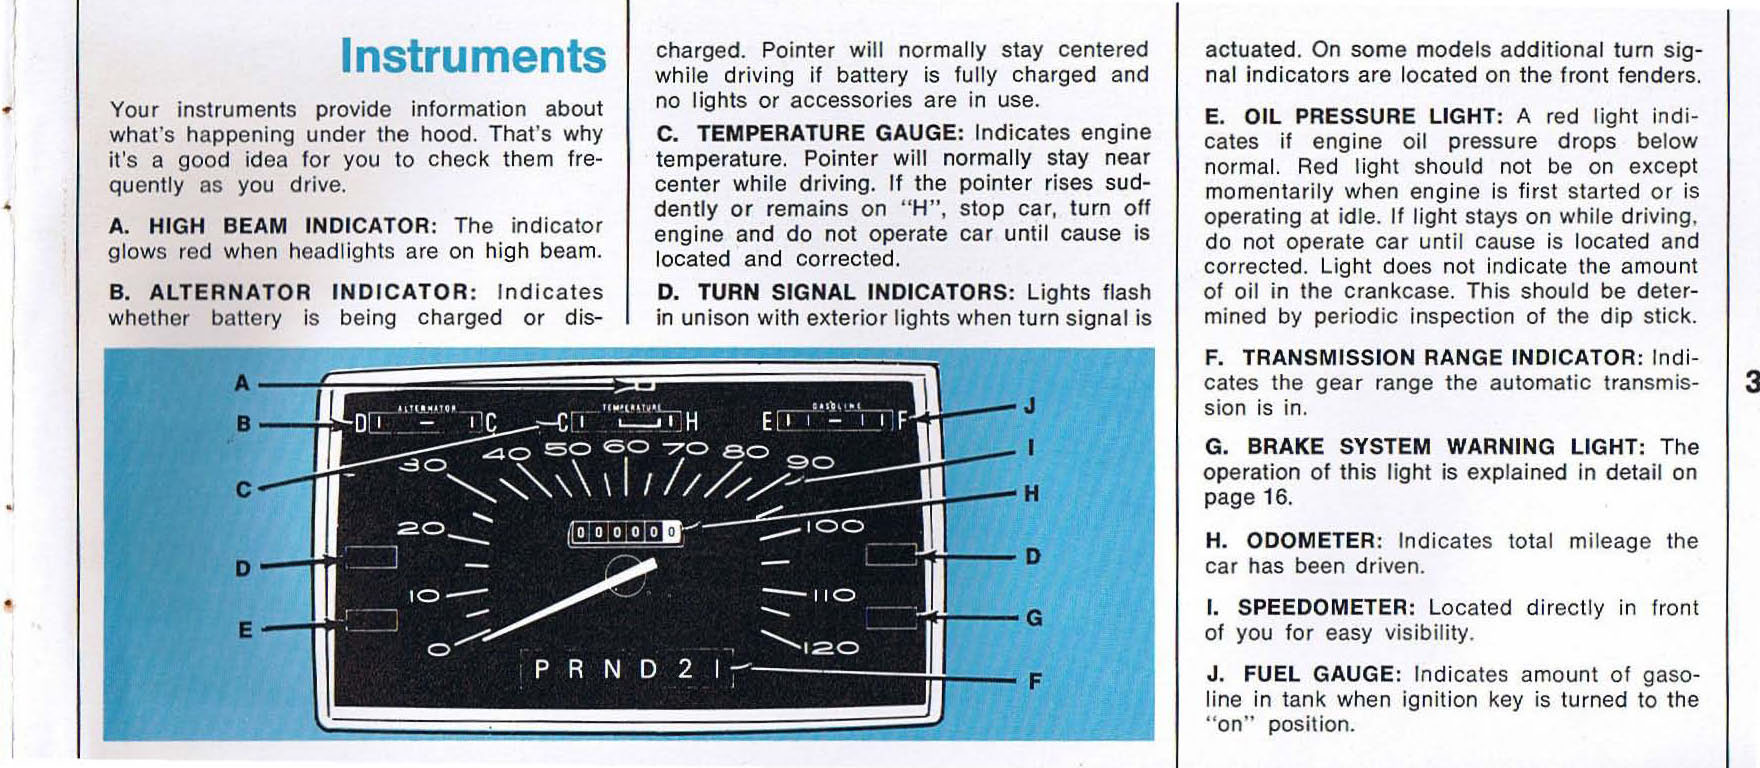 1969_Plymouth_Fury_Owners_Manual-03